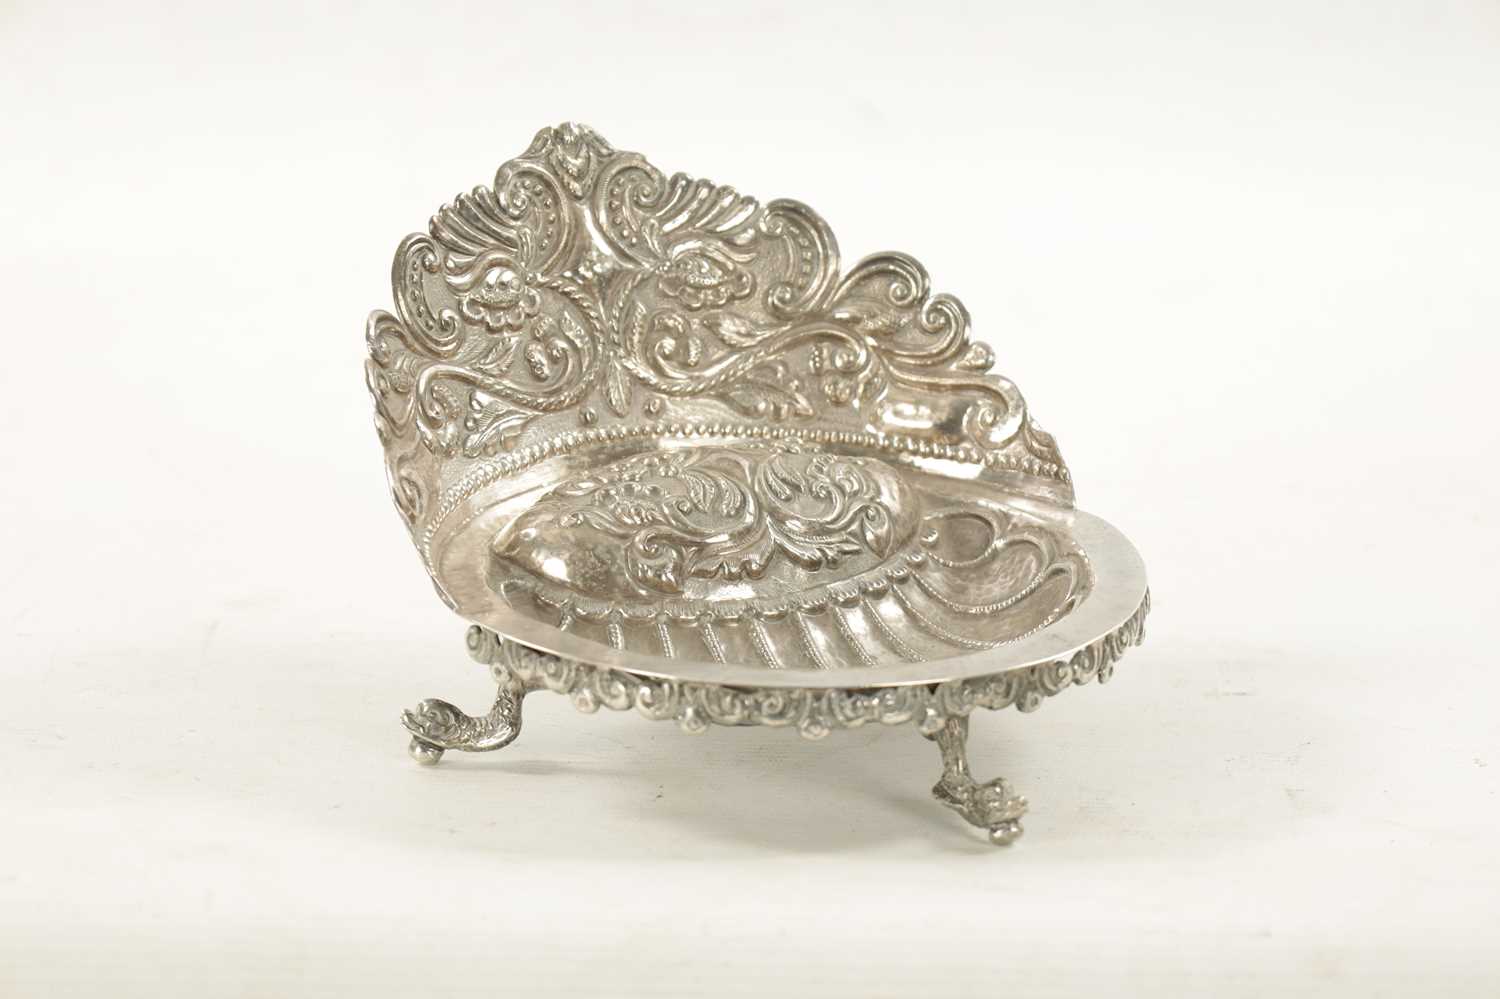 AN EARLY 19TH CENTURY SOUTH AMERICAN SILVER DISH - Image 4 of 7